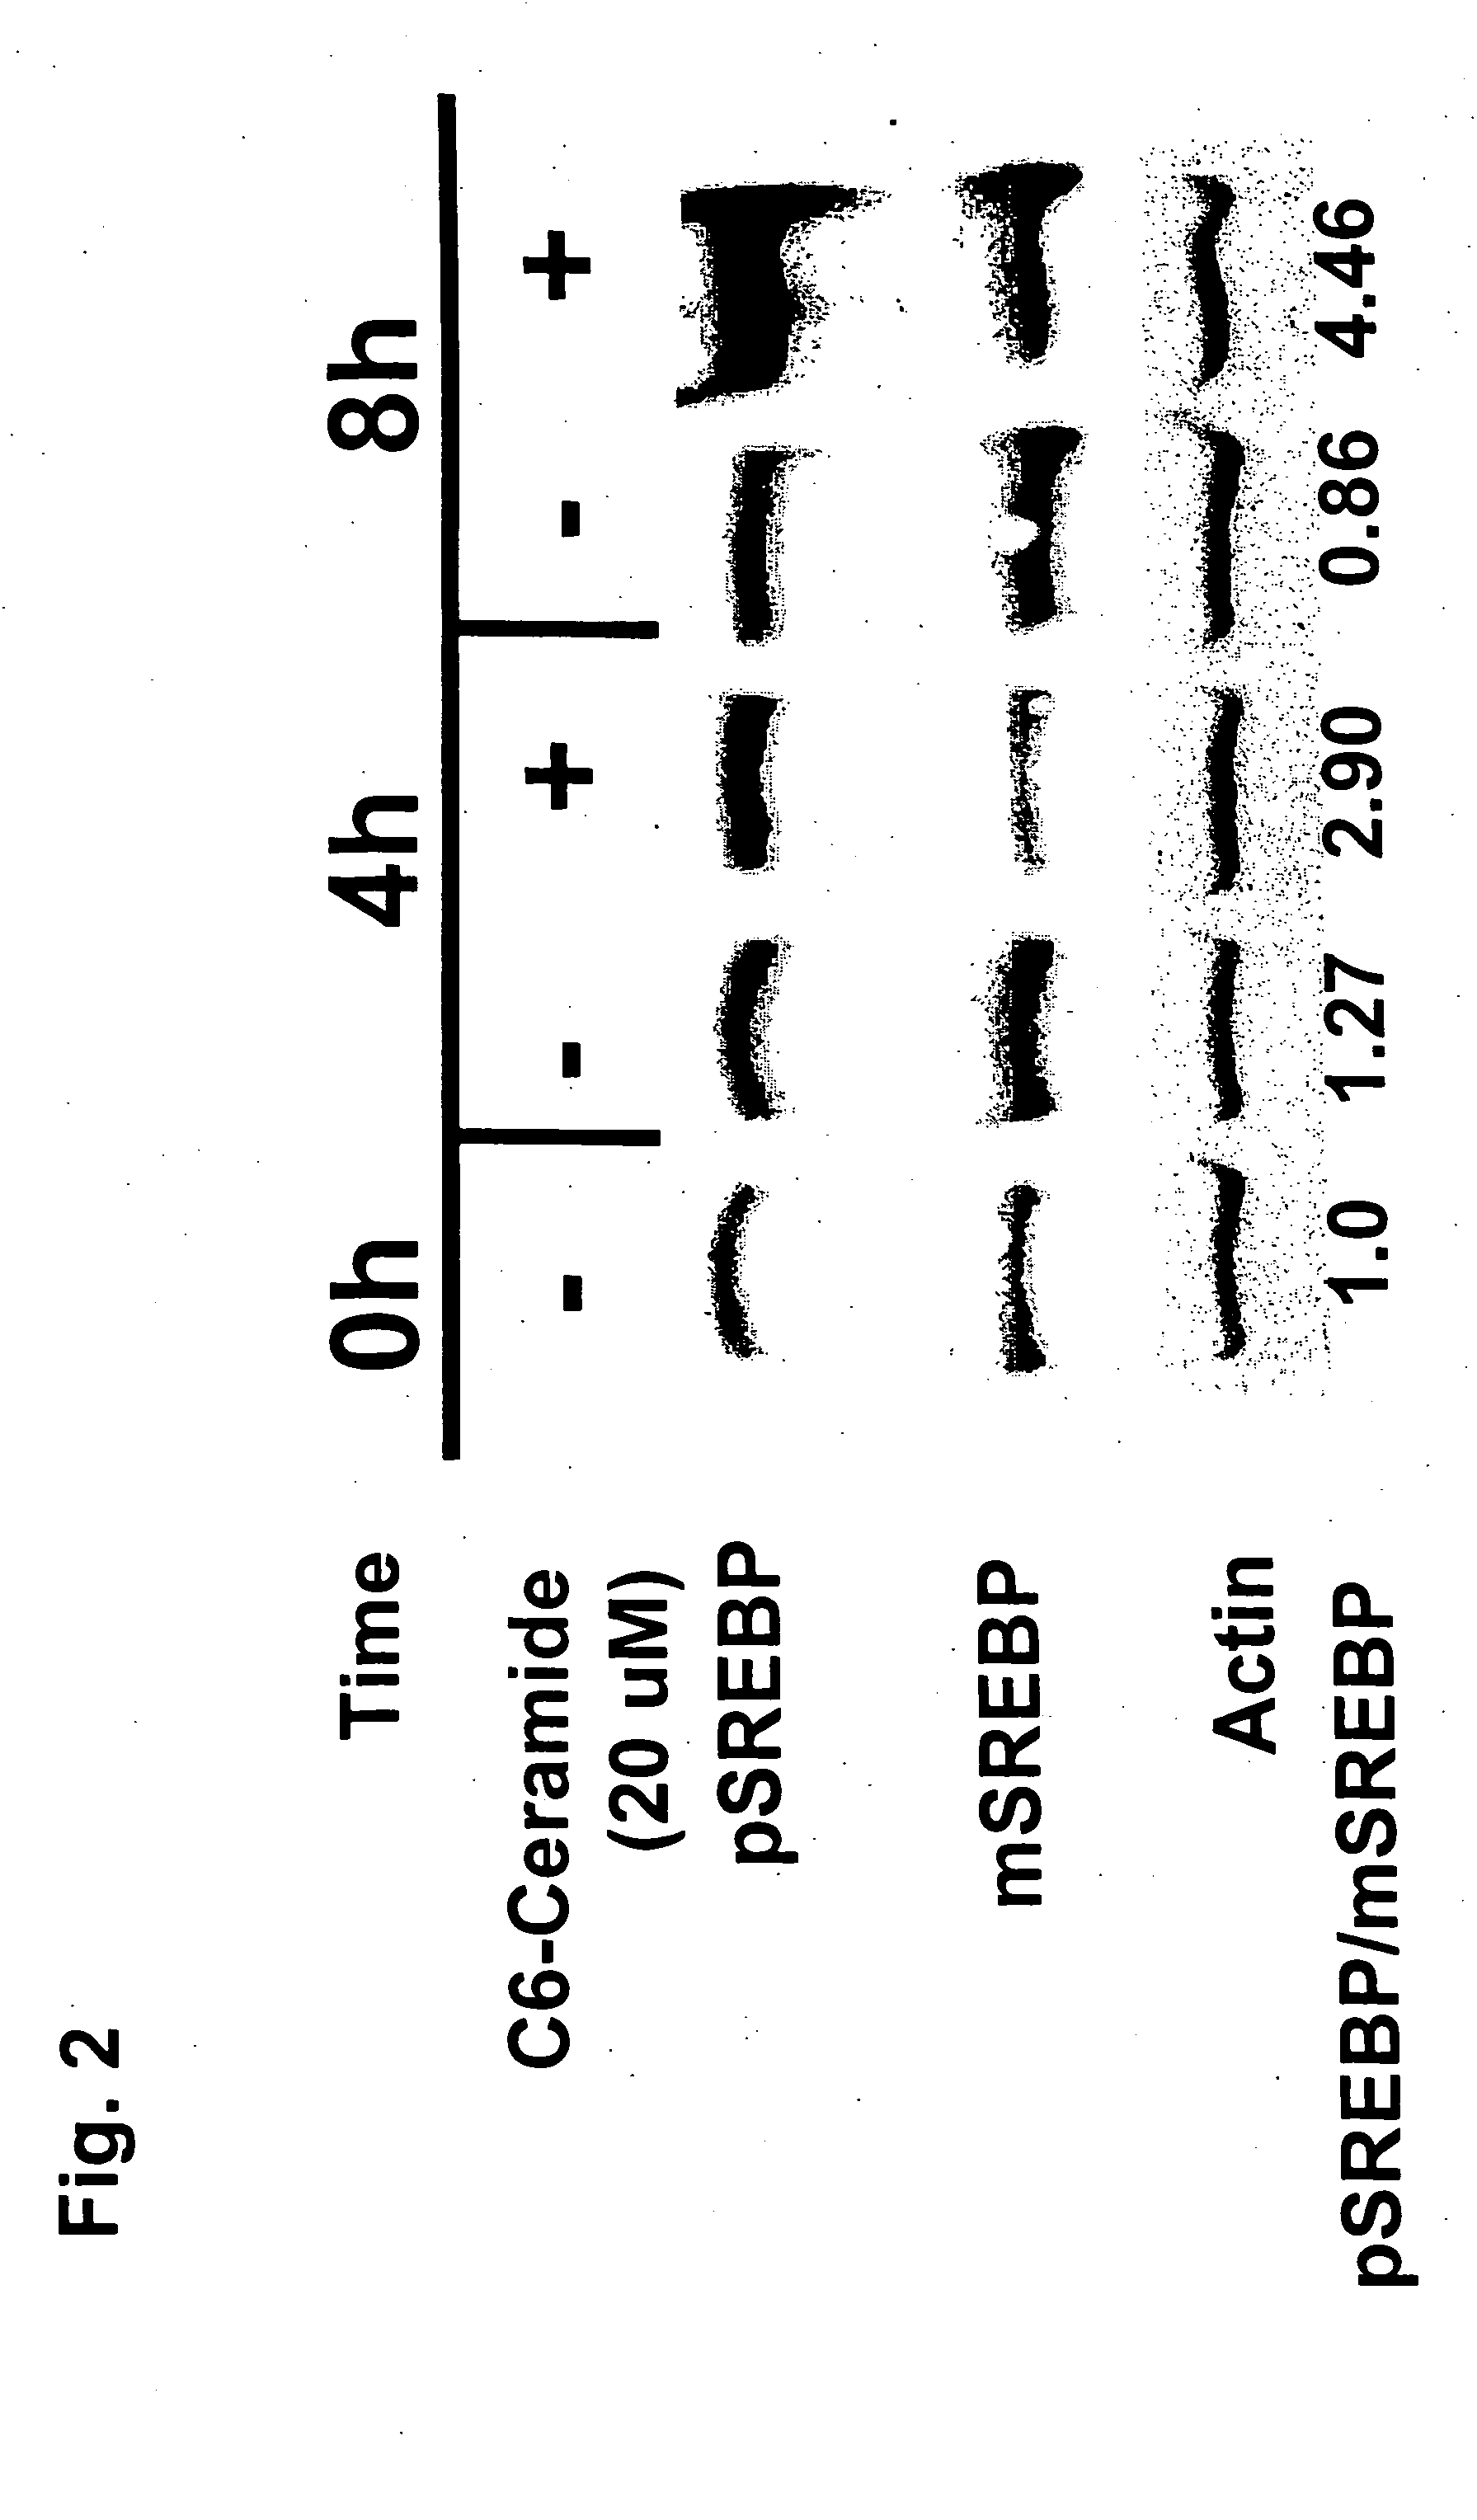 Ceramide de novo synthesis-based therapeutic and prophylactic methods, and related articles of manufacture